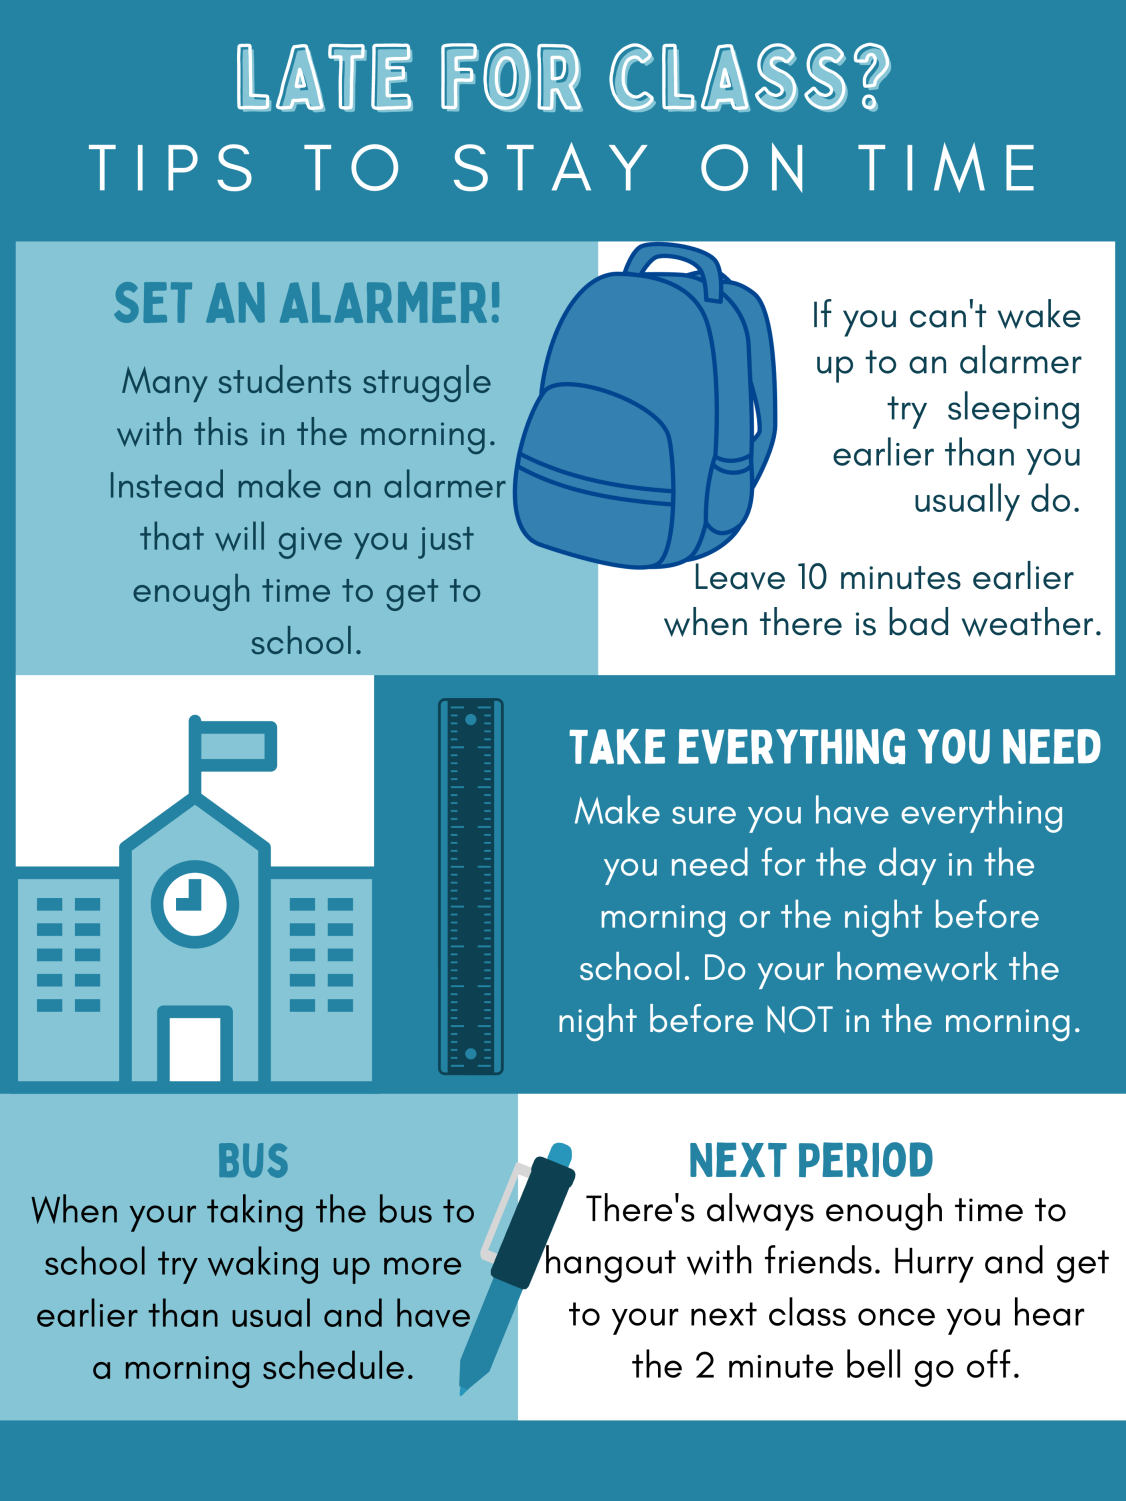 Tips+to+Stay+on+Time+for+School